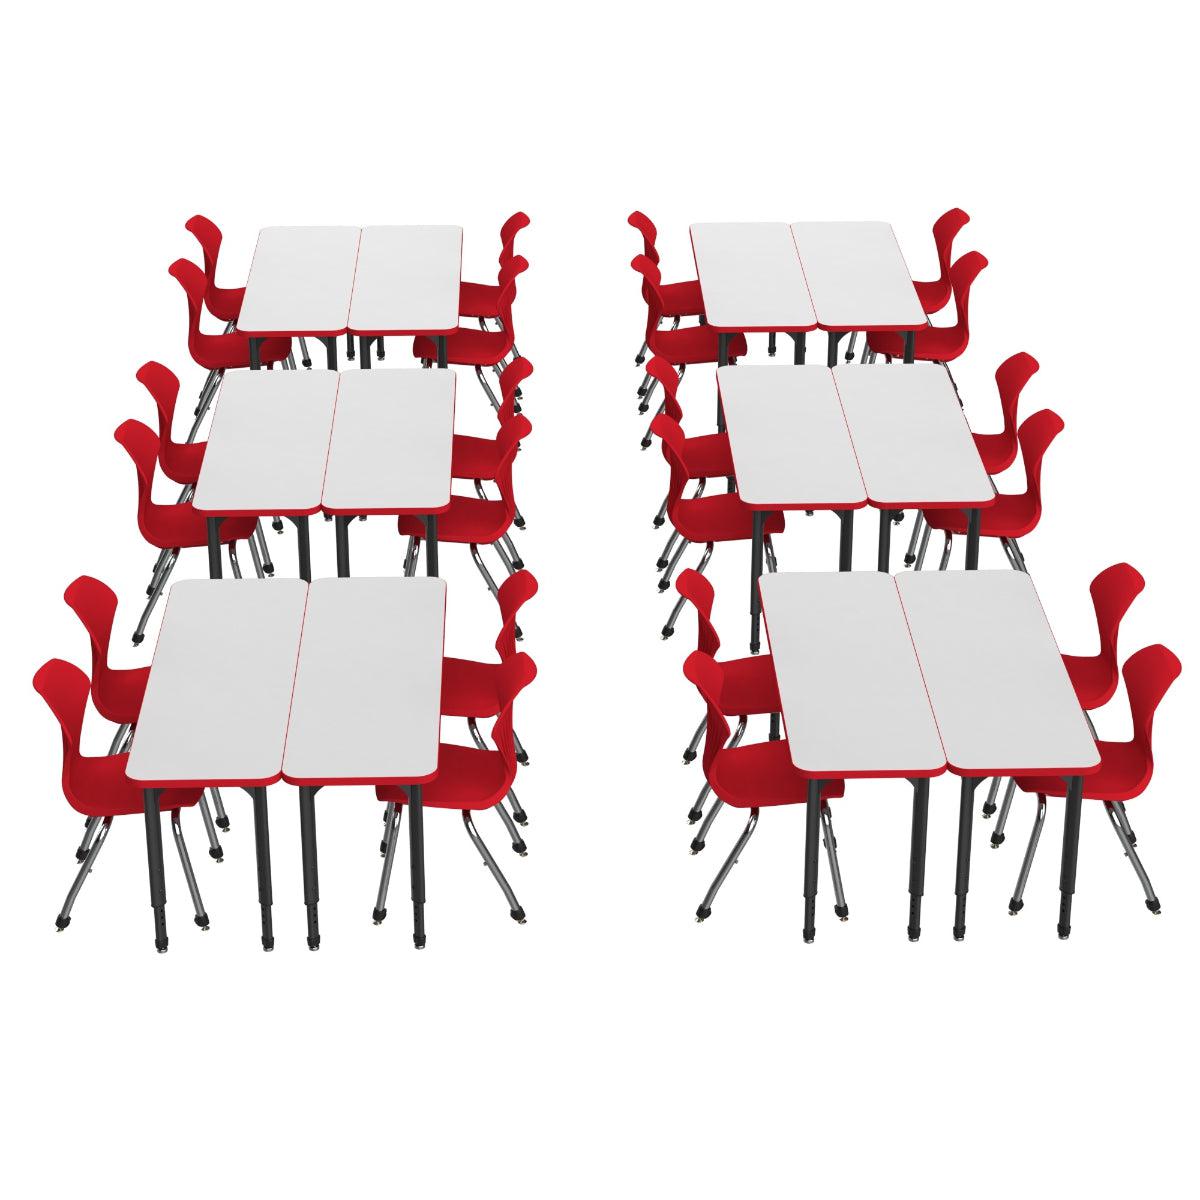 Apex White Dry Erase Classroom Desk and Chair Package, 12 Rectangle 2-Student Collaborative Desks, 20" x 60", with 24 Apex Stack Chairs